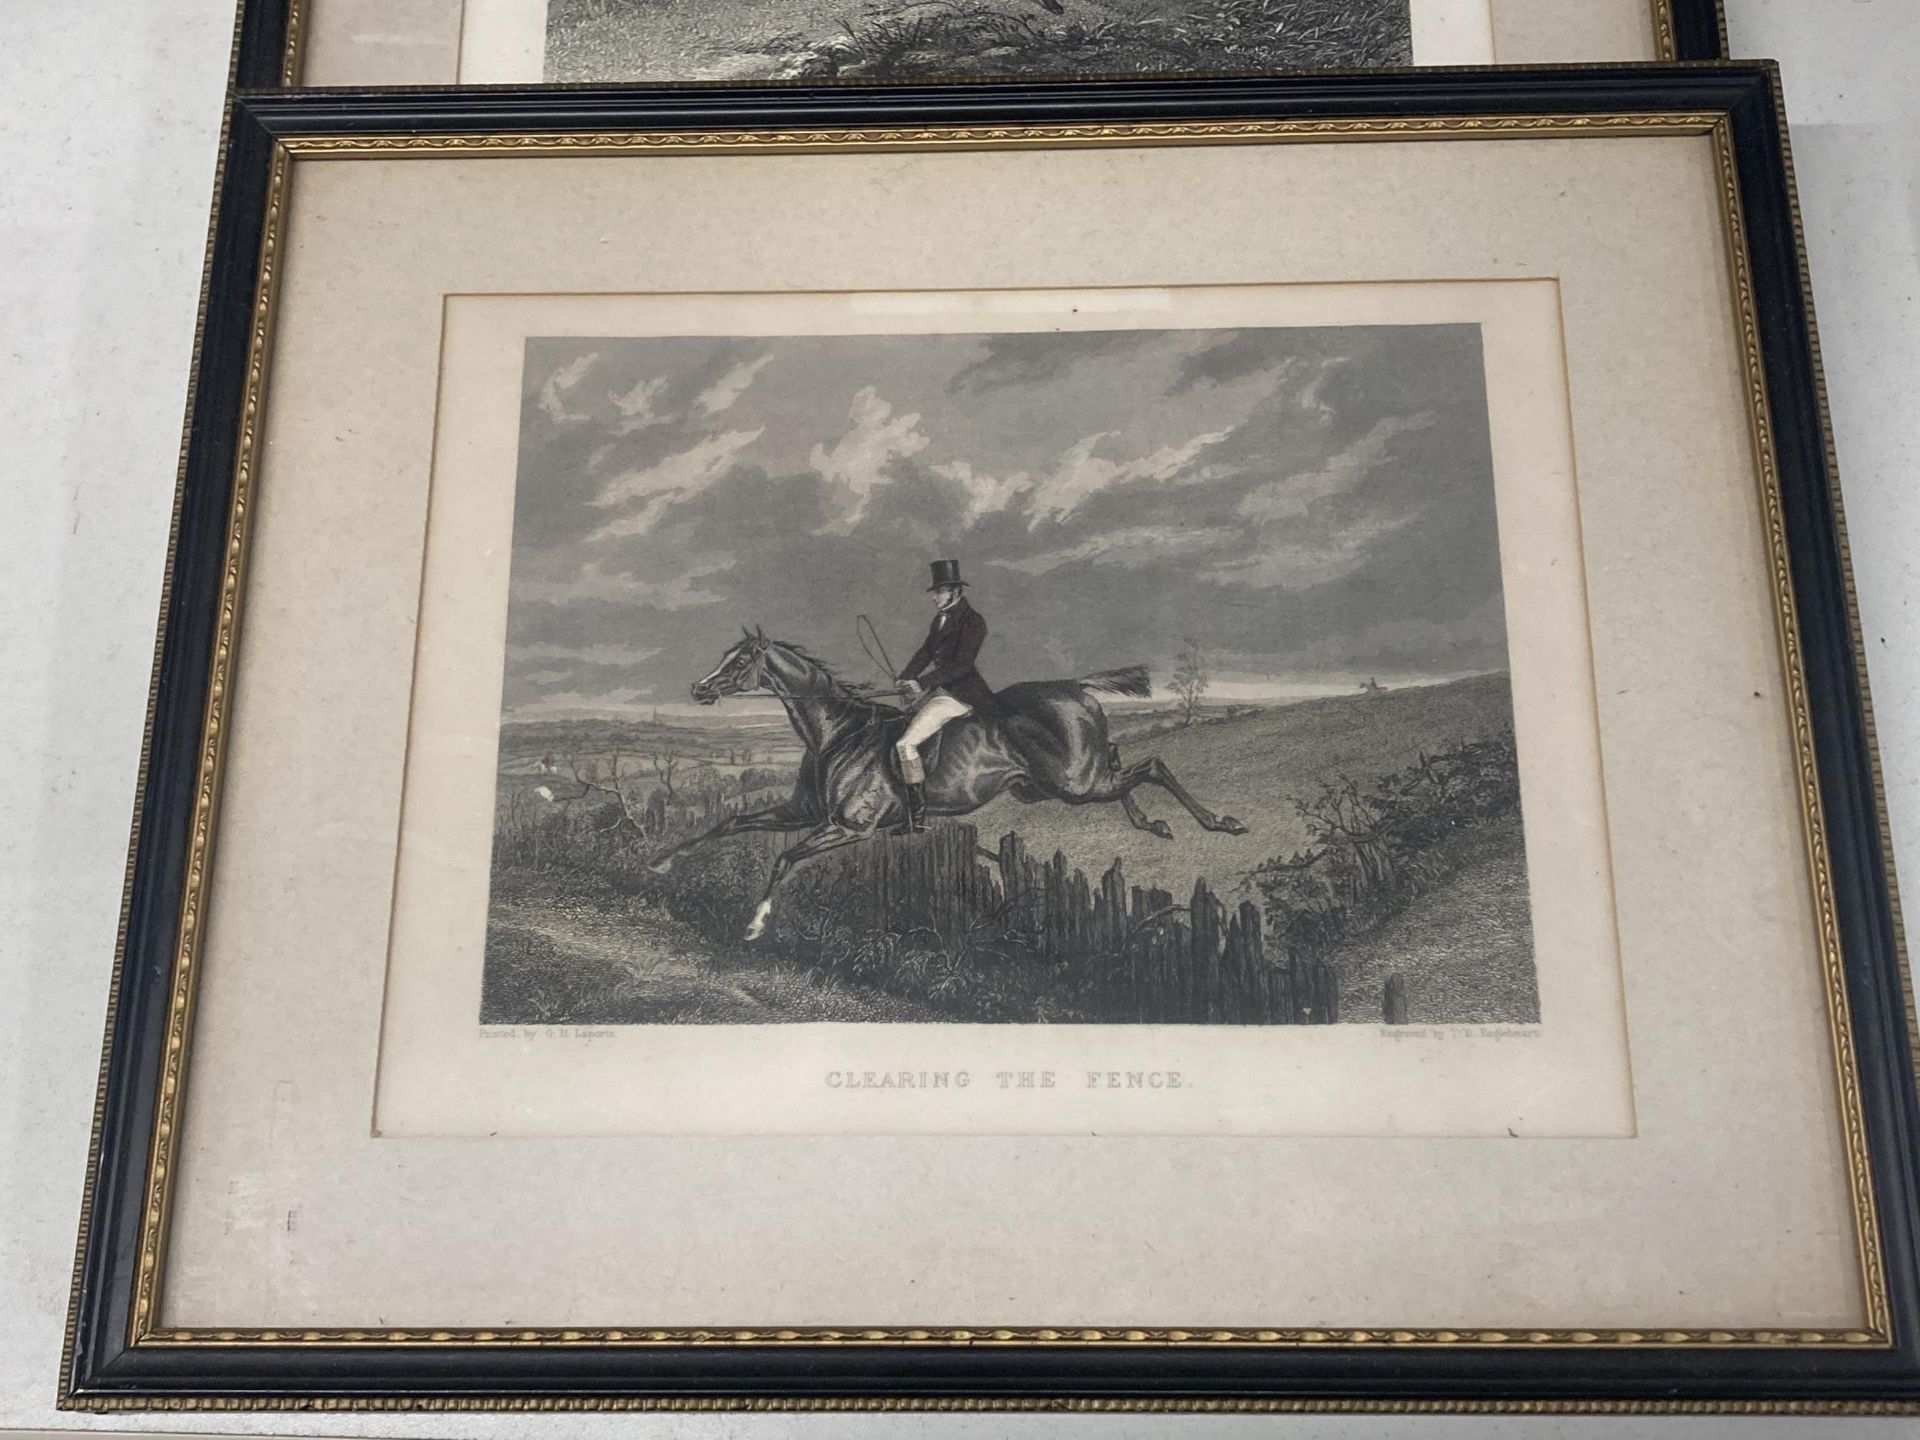 FOUR VINTAGE FRAMED HUNTING PRINTS, CLEARING THE FENCE, FOX BREAKING COVER, THE MASTER OF THE HOUNDS - Image 2 of 5